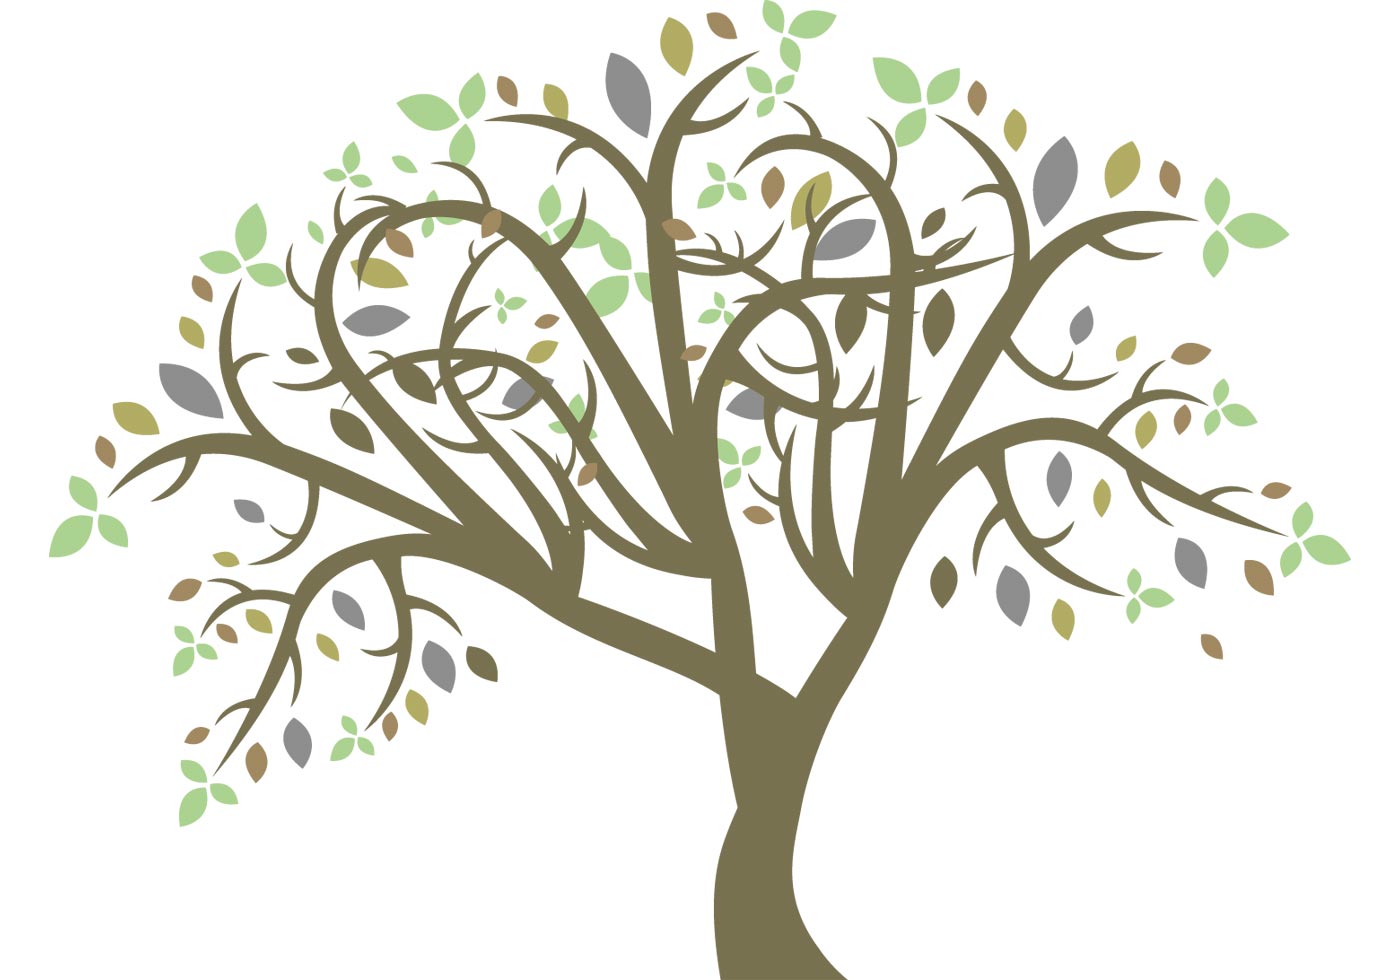 Download Vector colorful tree - Download Free Vector Art, Stock Graphics & Images